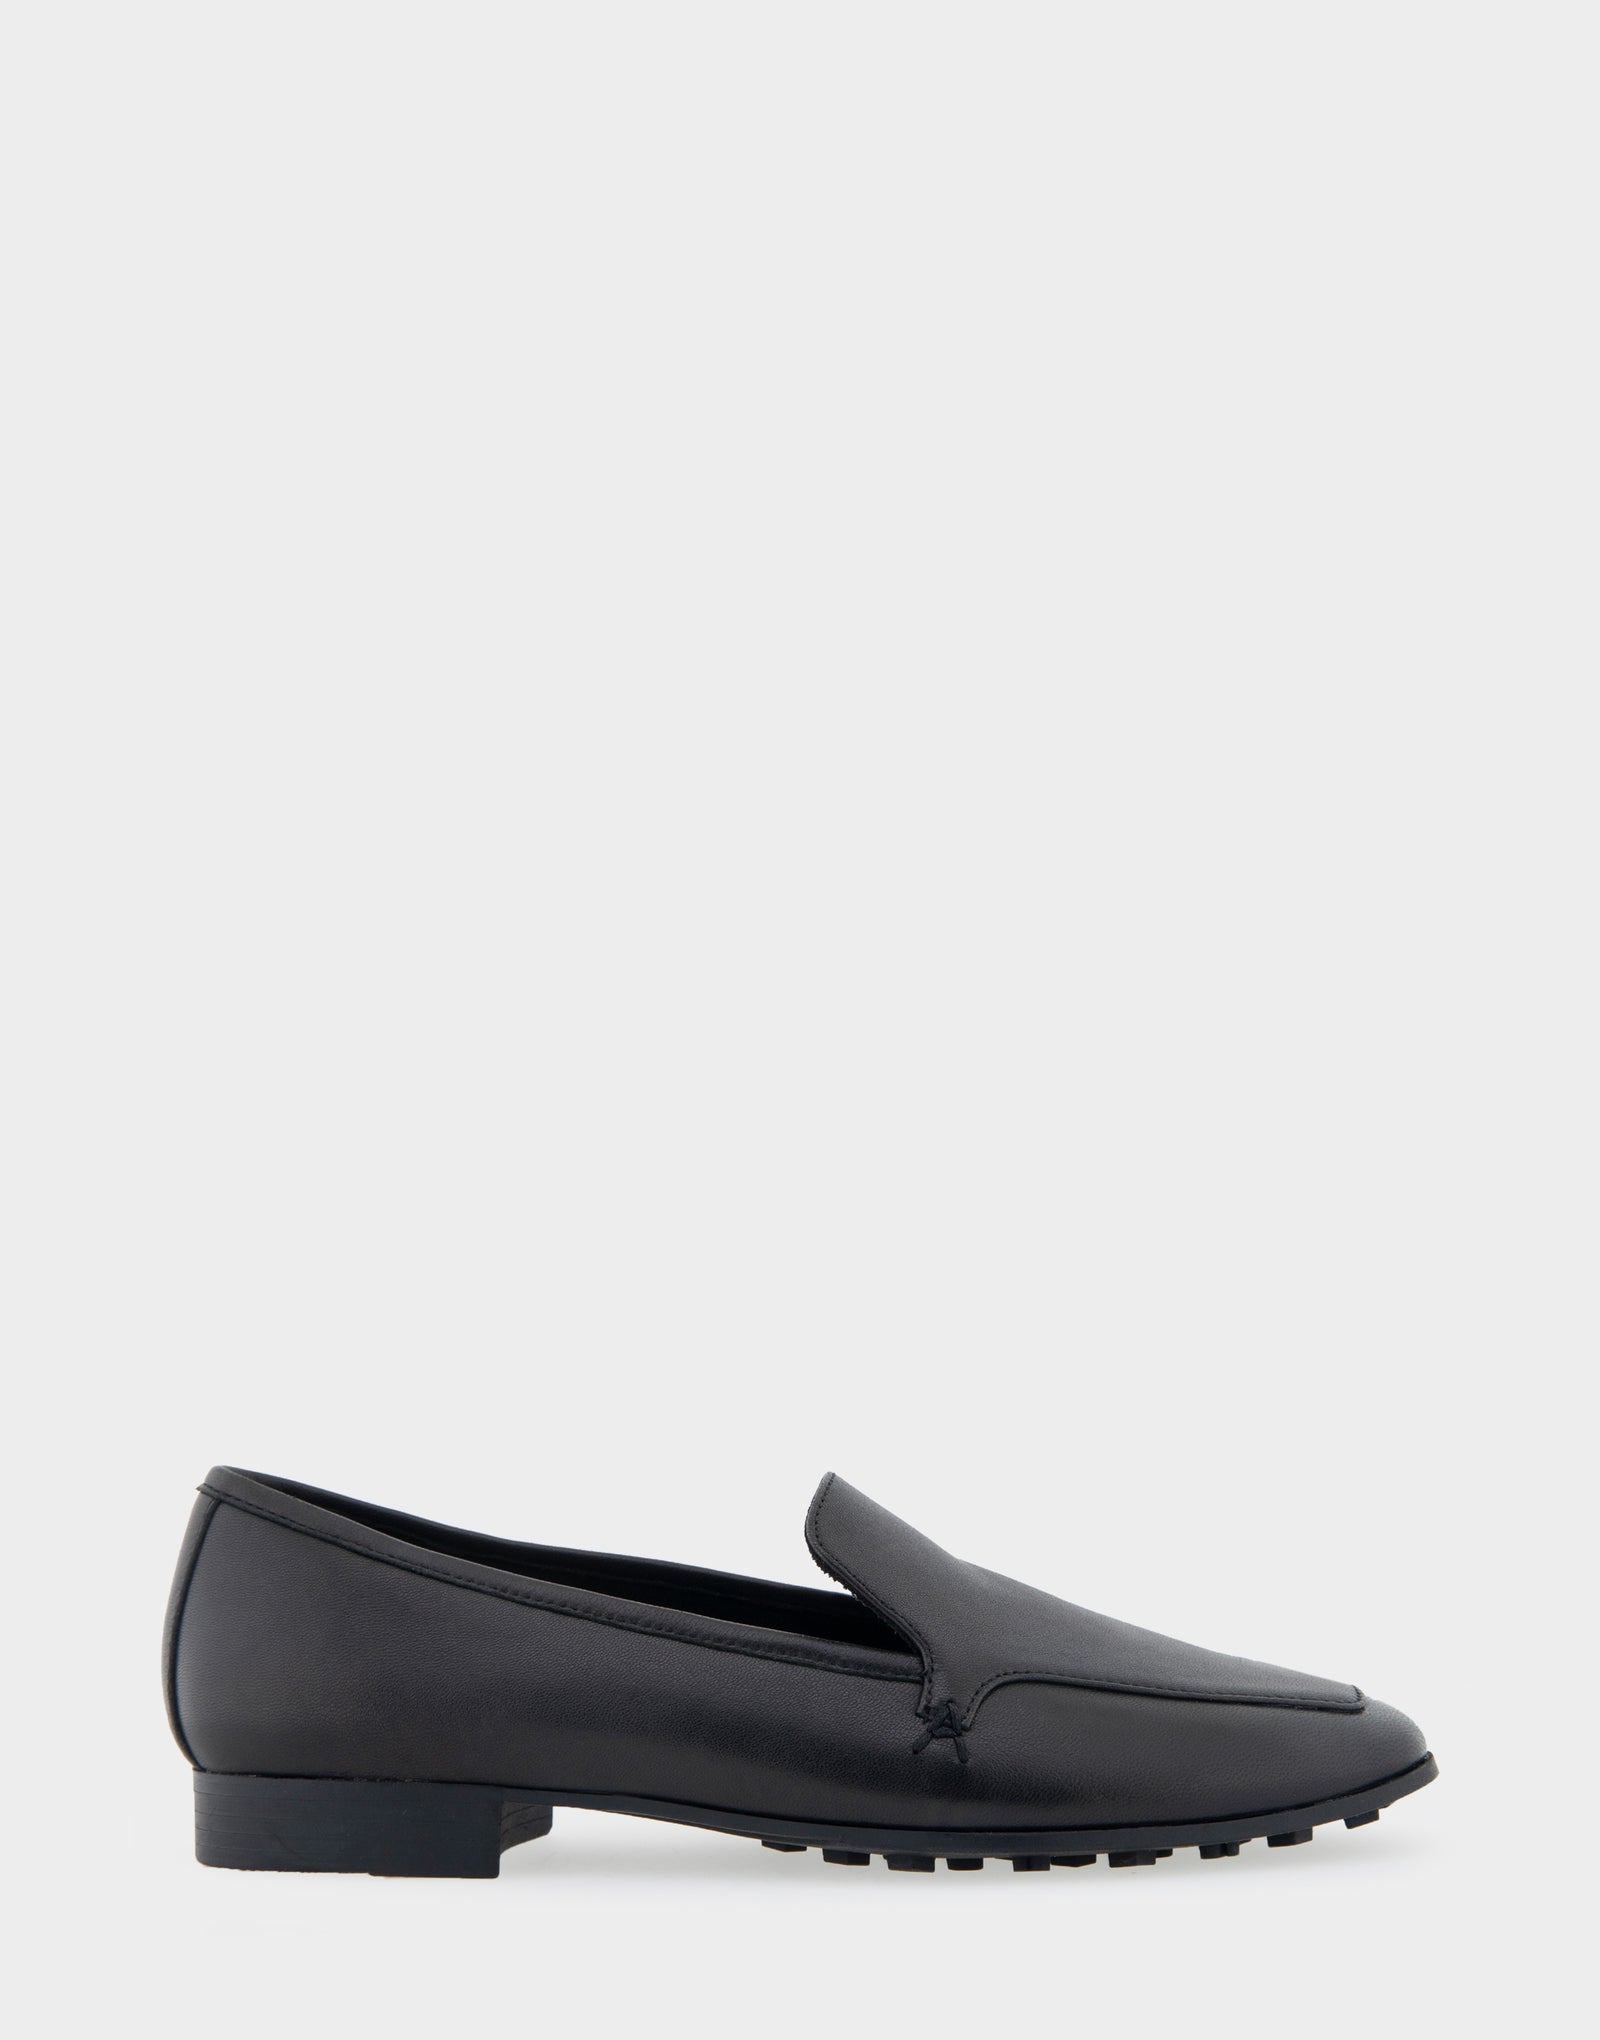 Women's Tailored Loafer in Black Leather